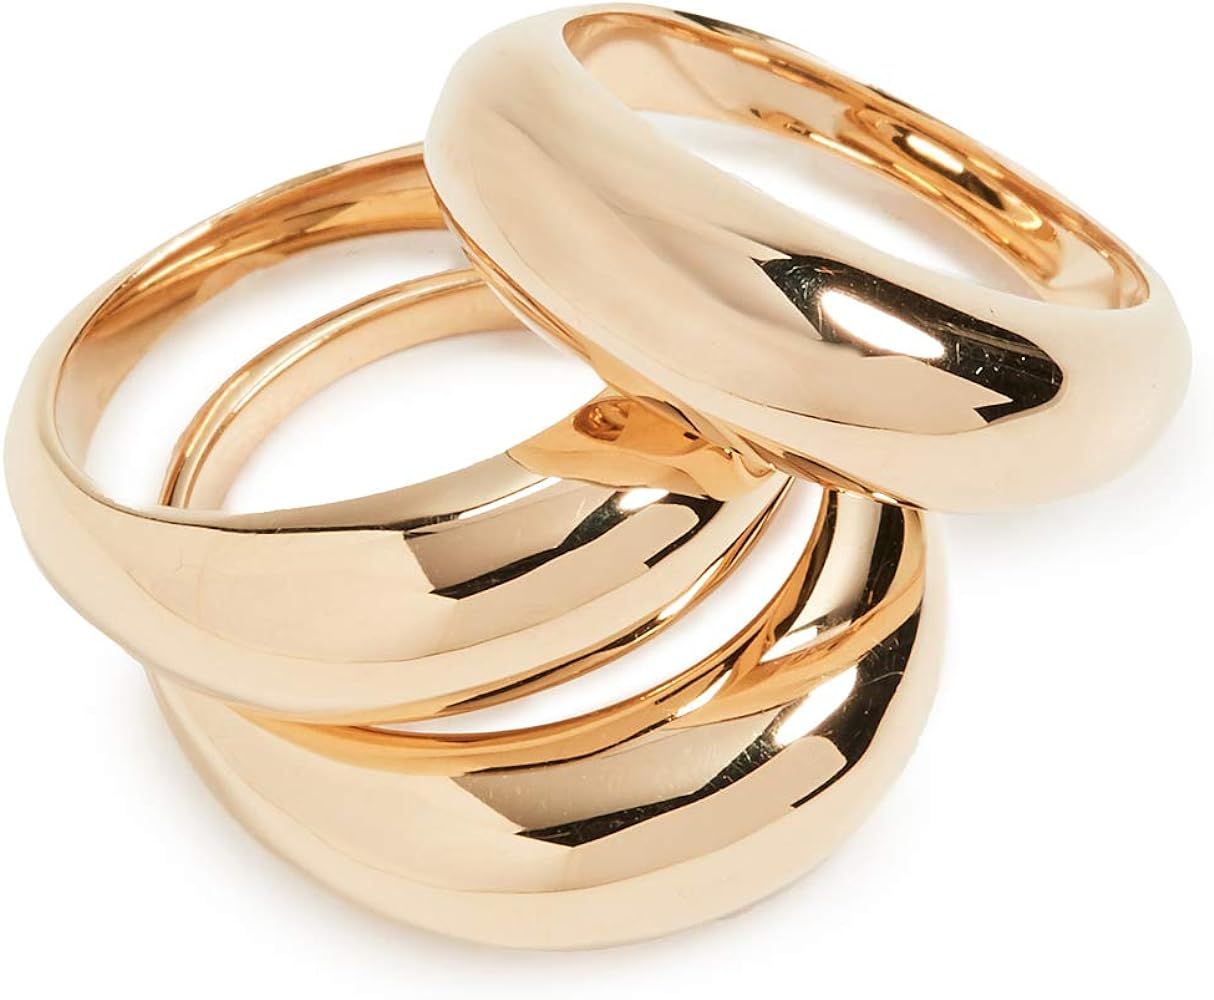 Women's Fanned Stacking Rings | Amazon (US)